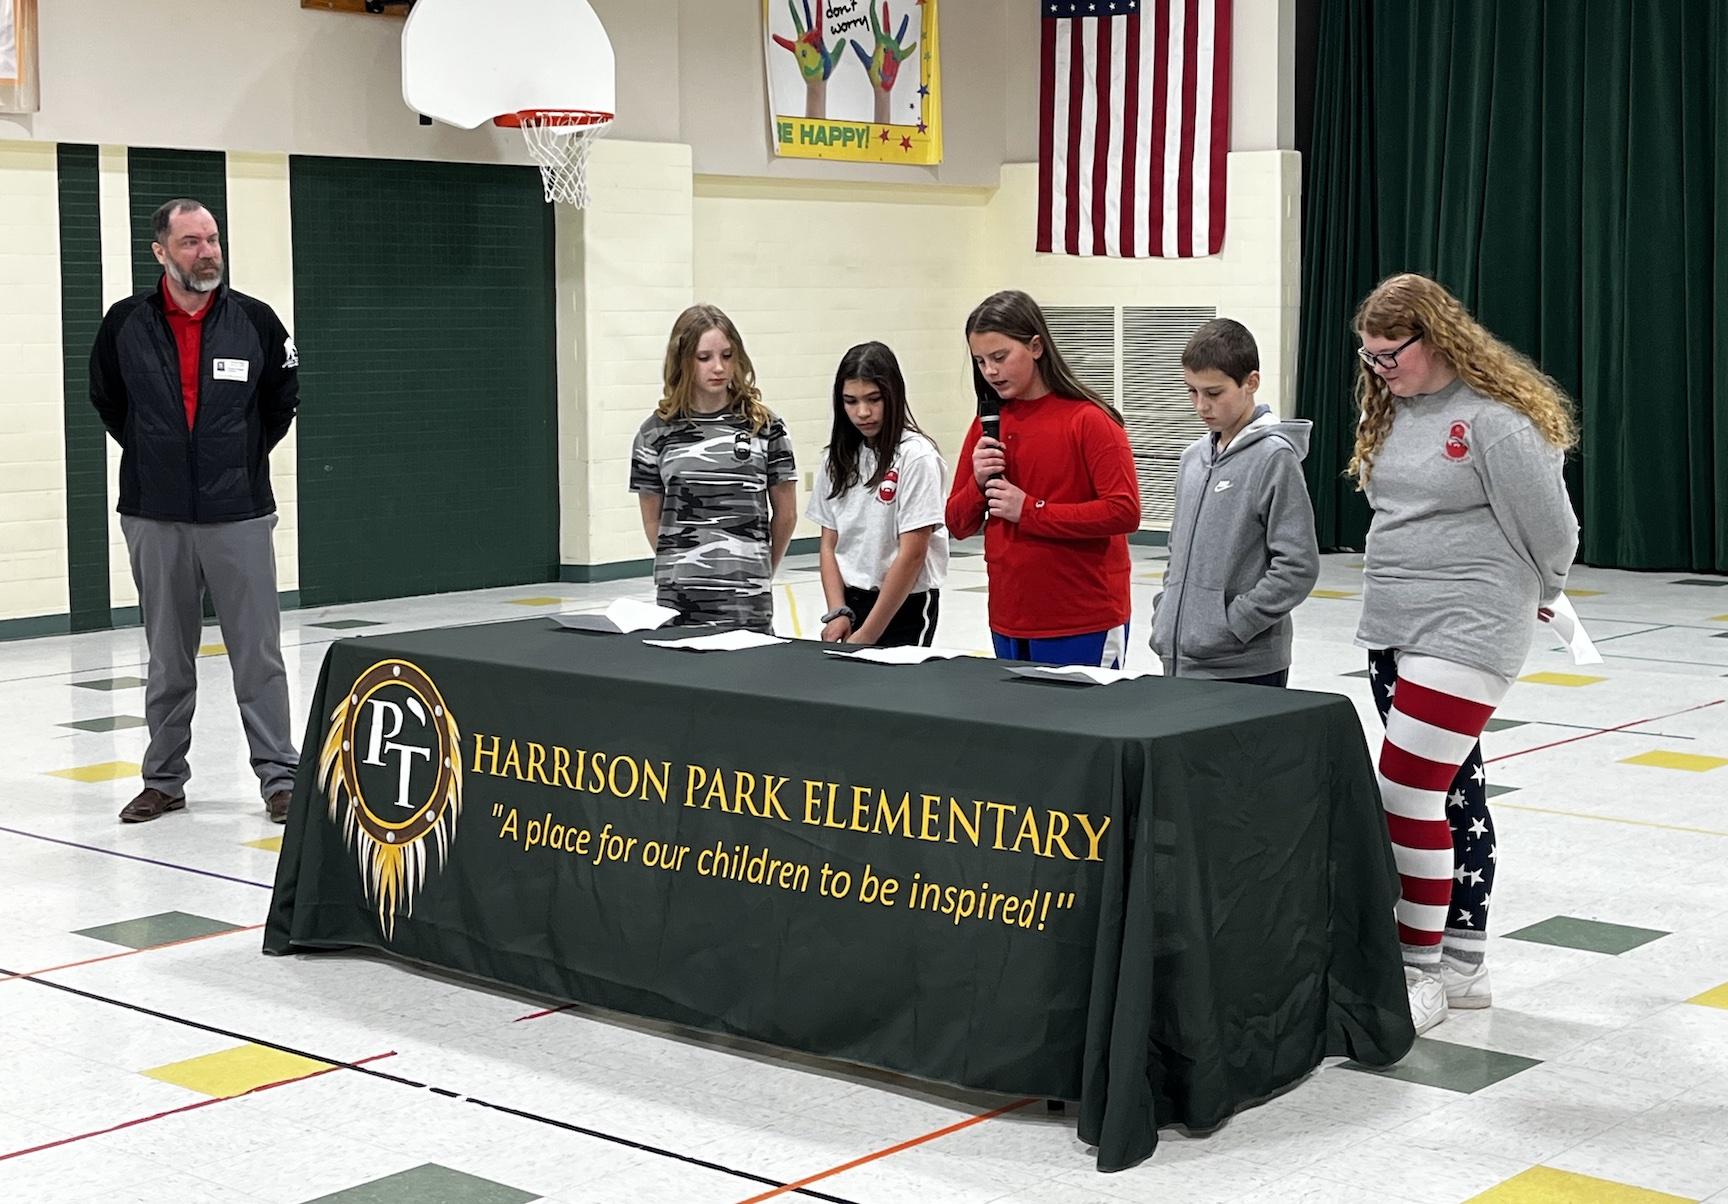 Wounded Warrior Representative Shawn Seguin listens to remarks by  5th-grade students Lauren Kain, Katelyn Speer, Samantha O’Hern, Owen Stewart, and Lydia Grant